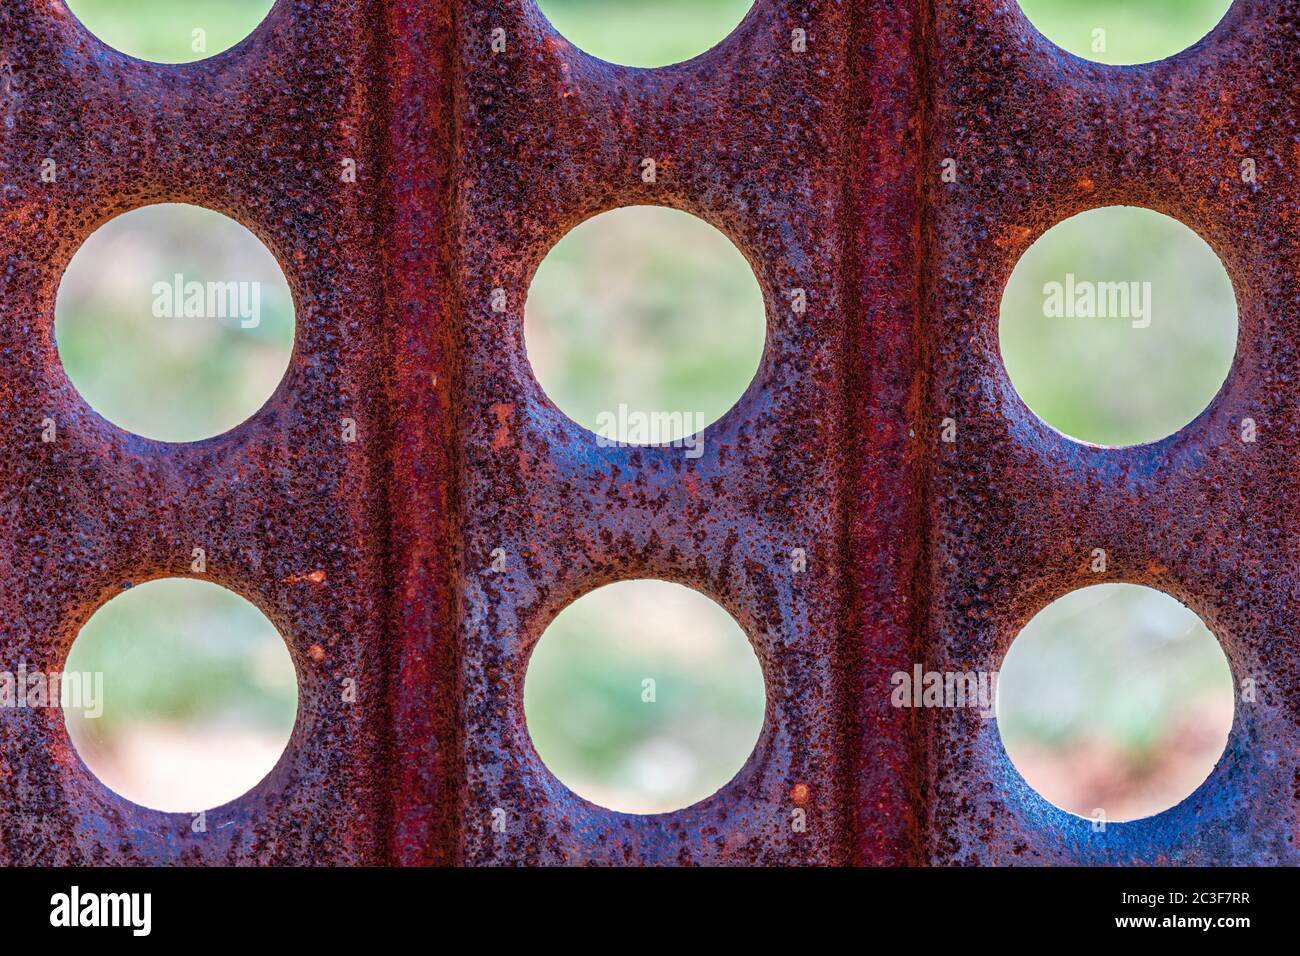 Small Round Holes in a Thin Metal Sheet Stock Photo - Image of landscape,  openwork: 71671522